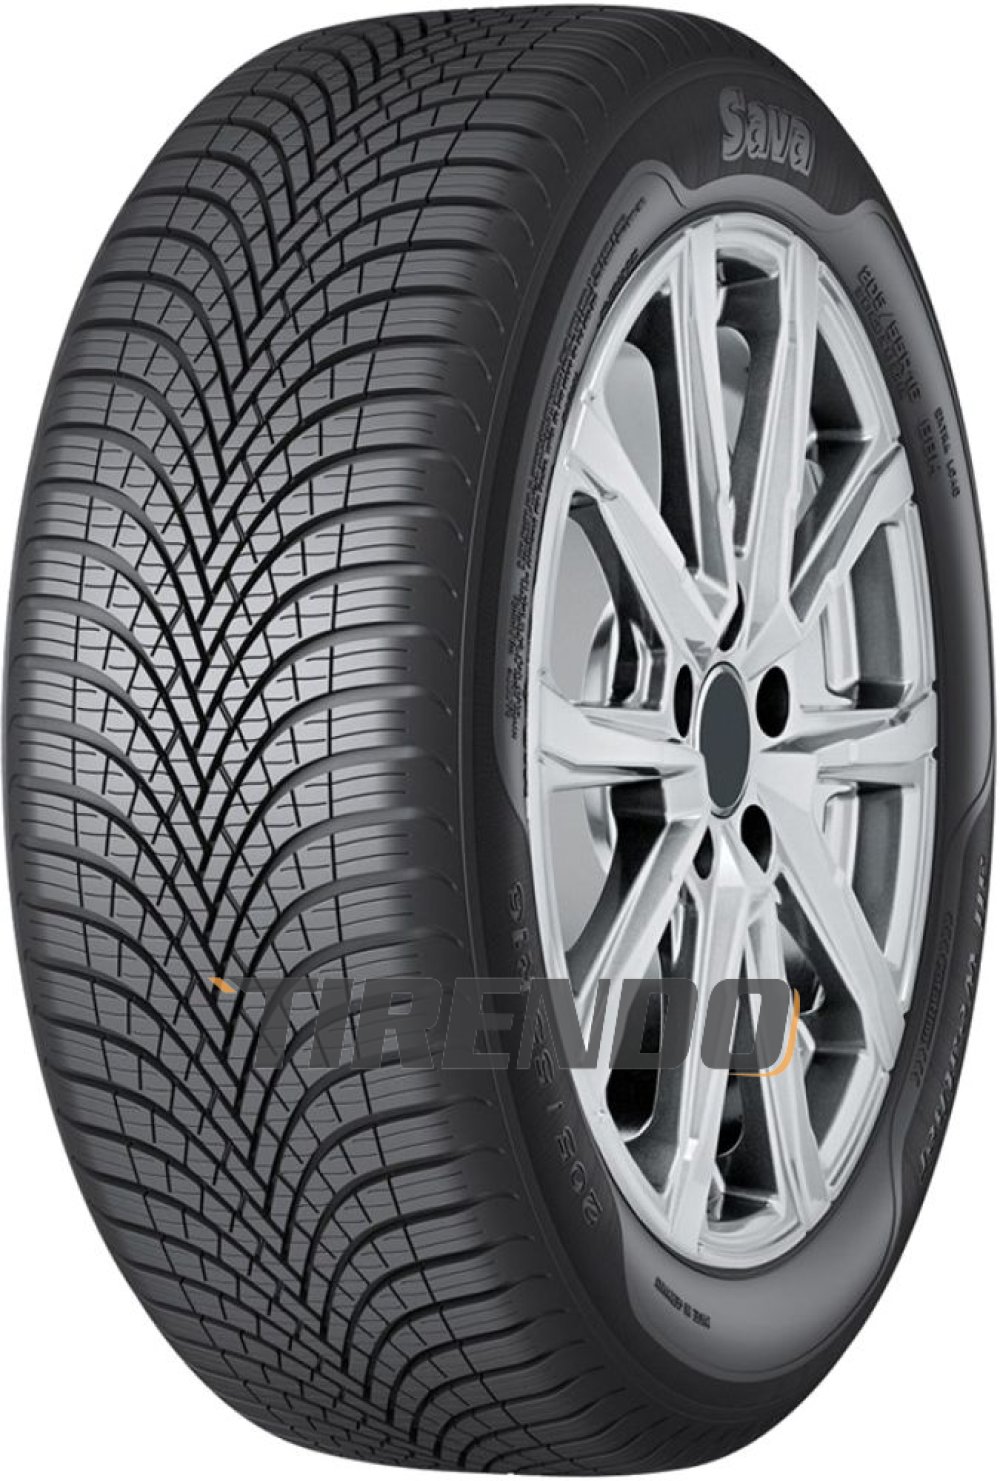 Image of Sava All Weather ( 215/50 R17 95V XL )